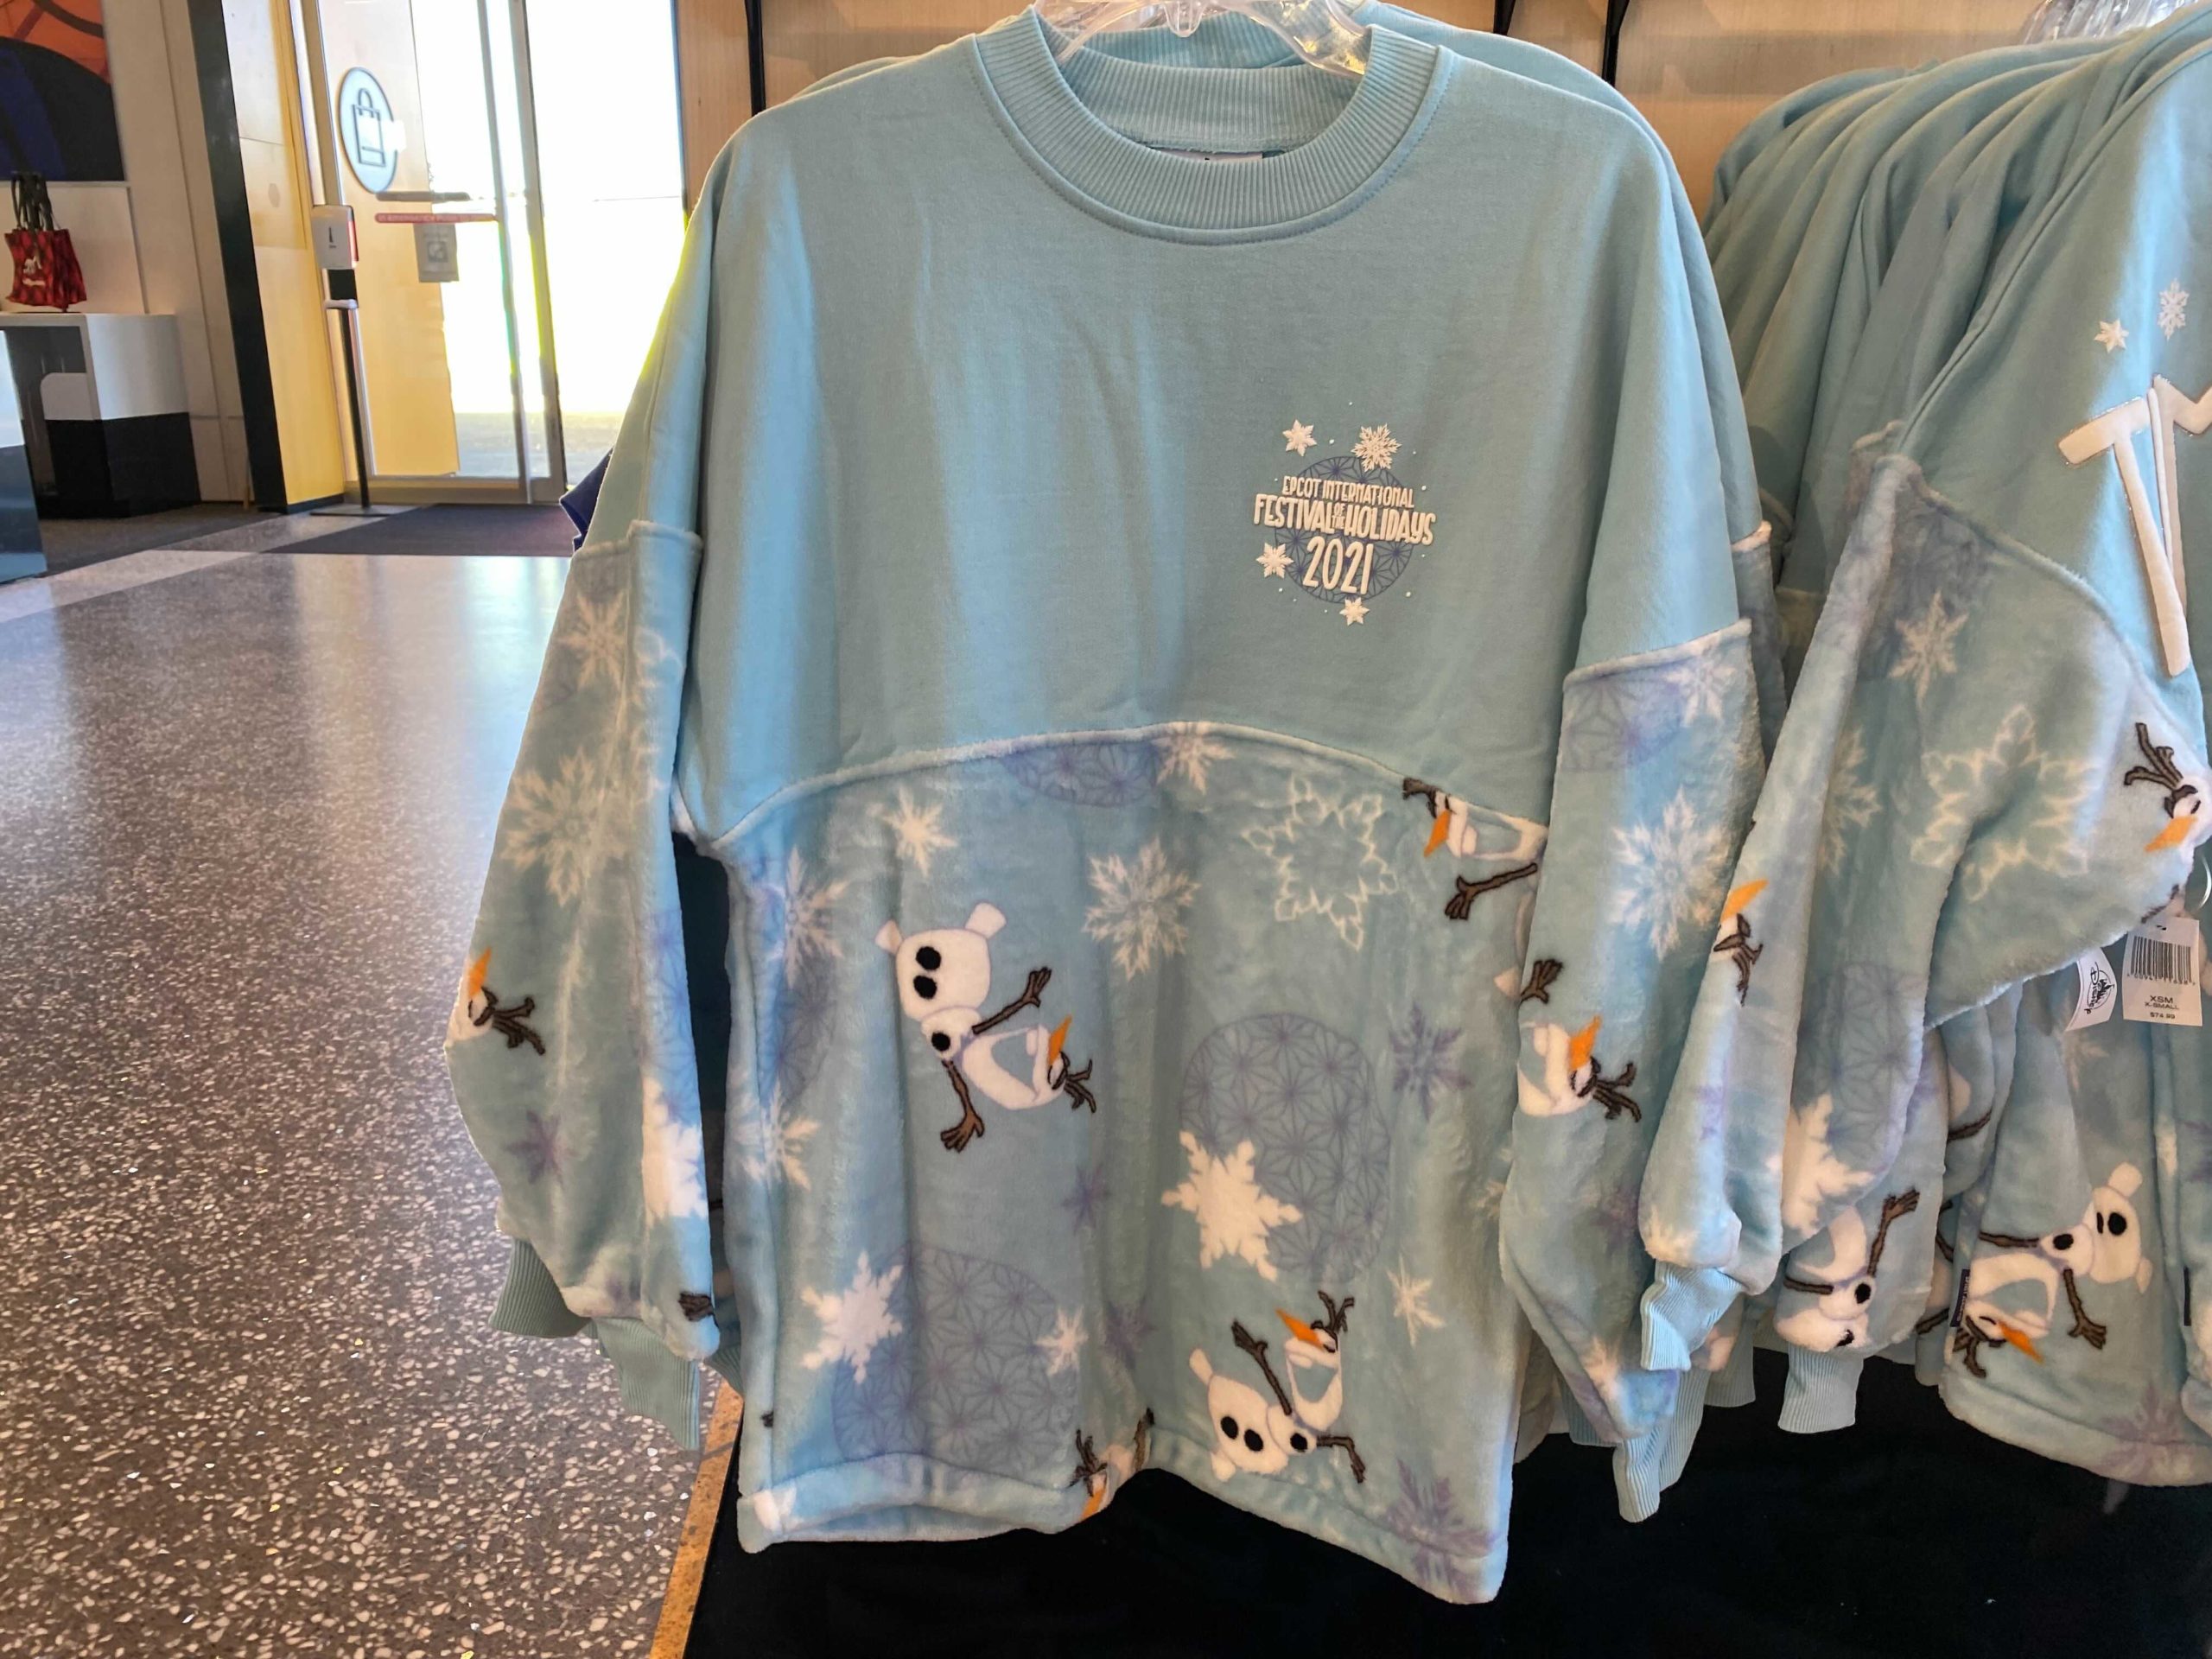 PHOTOS Celebrate ‘That Time of Year’ With the 2021 EPCOT International